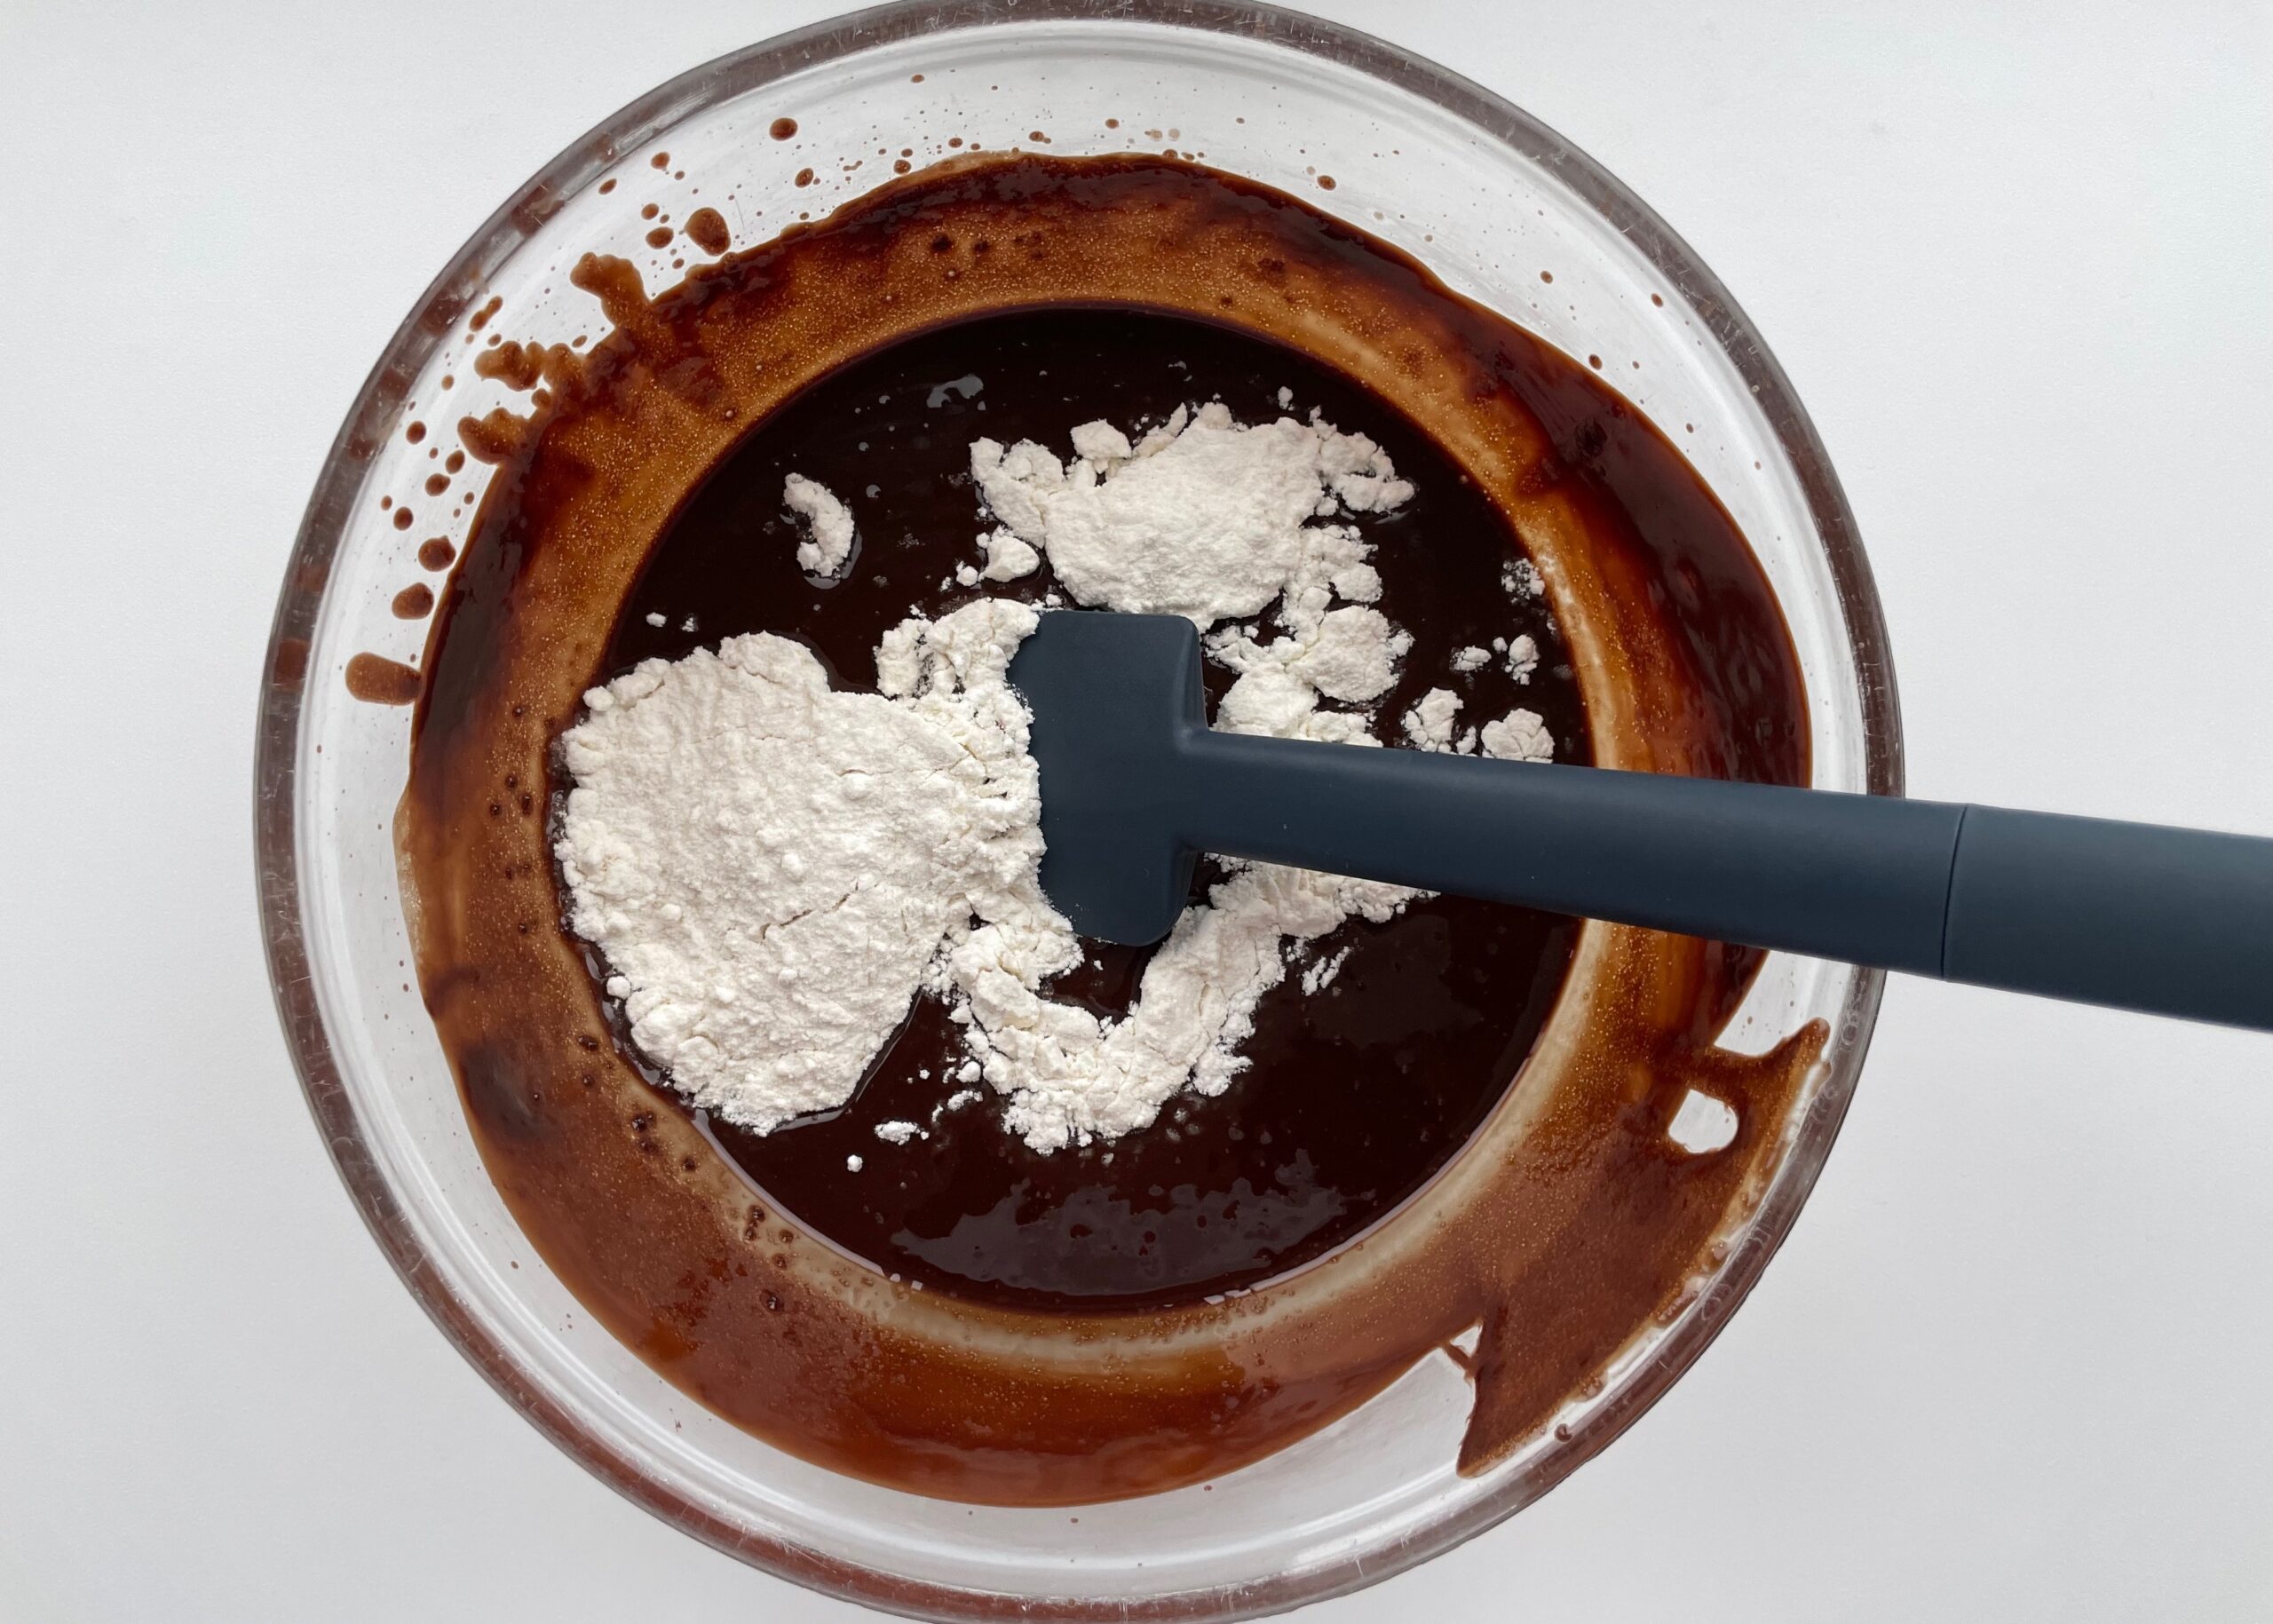 Gluten free French chocolate cake mixture with gluten free flour added